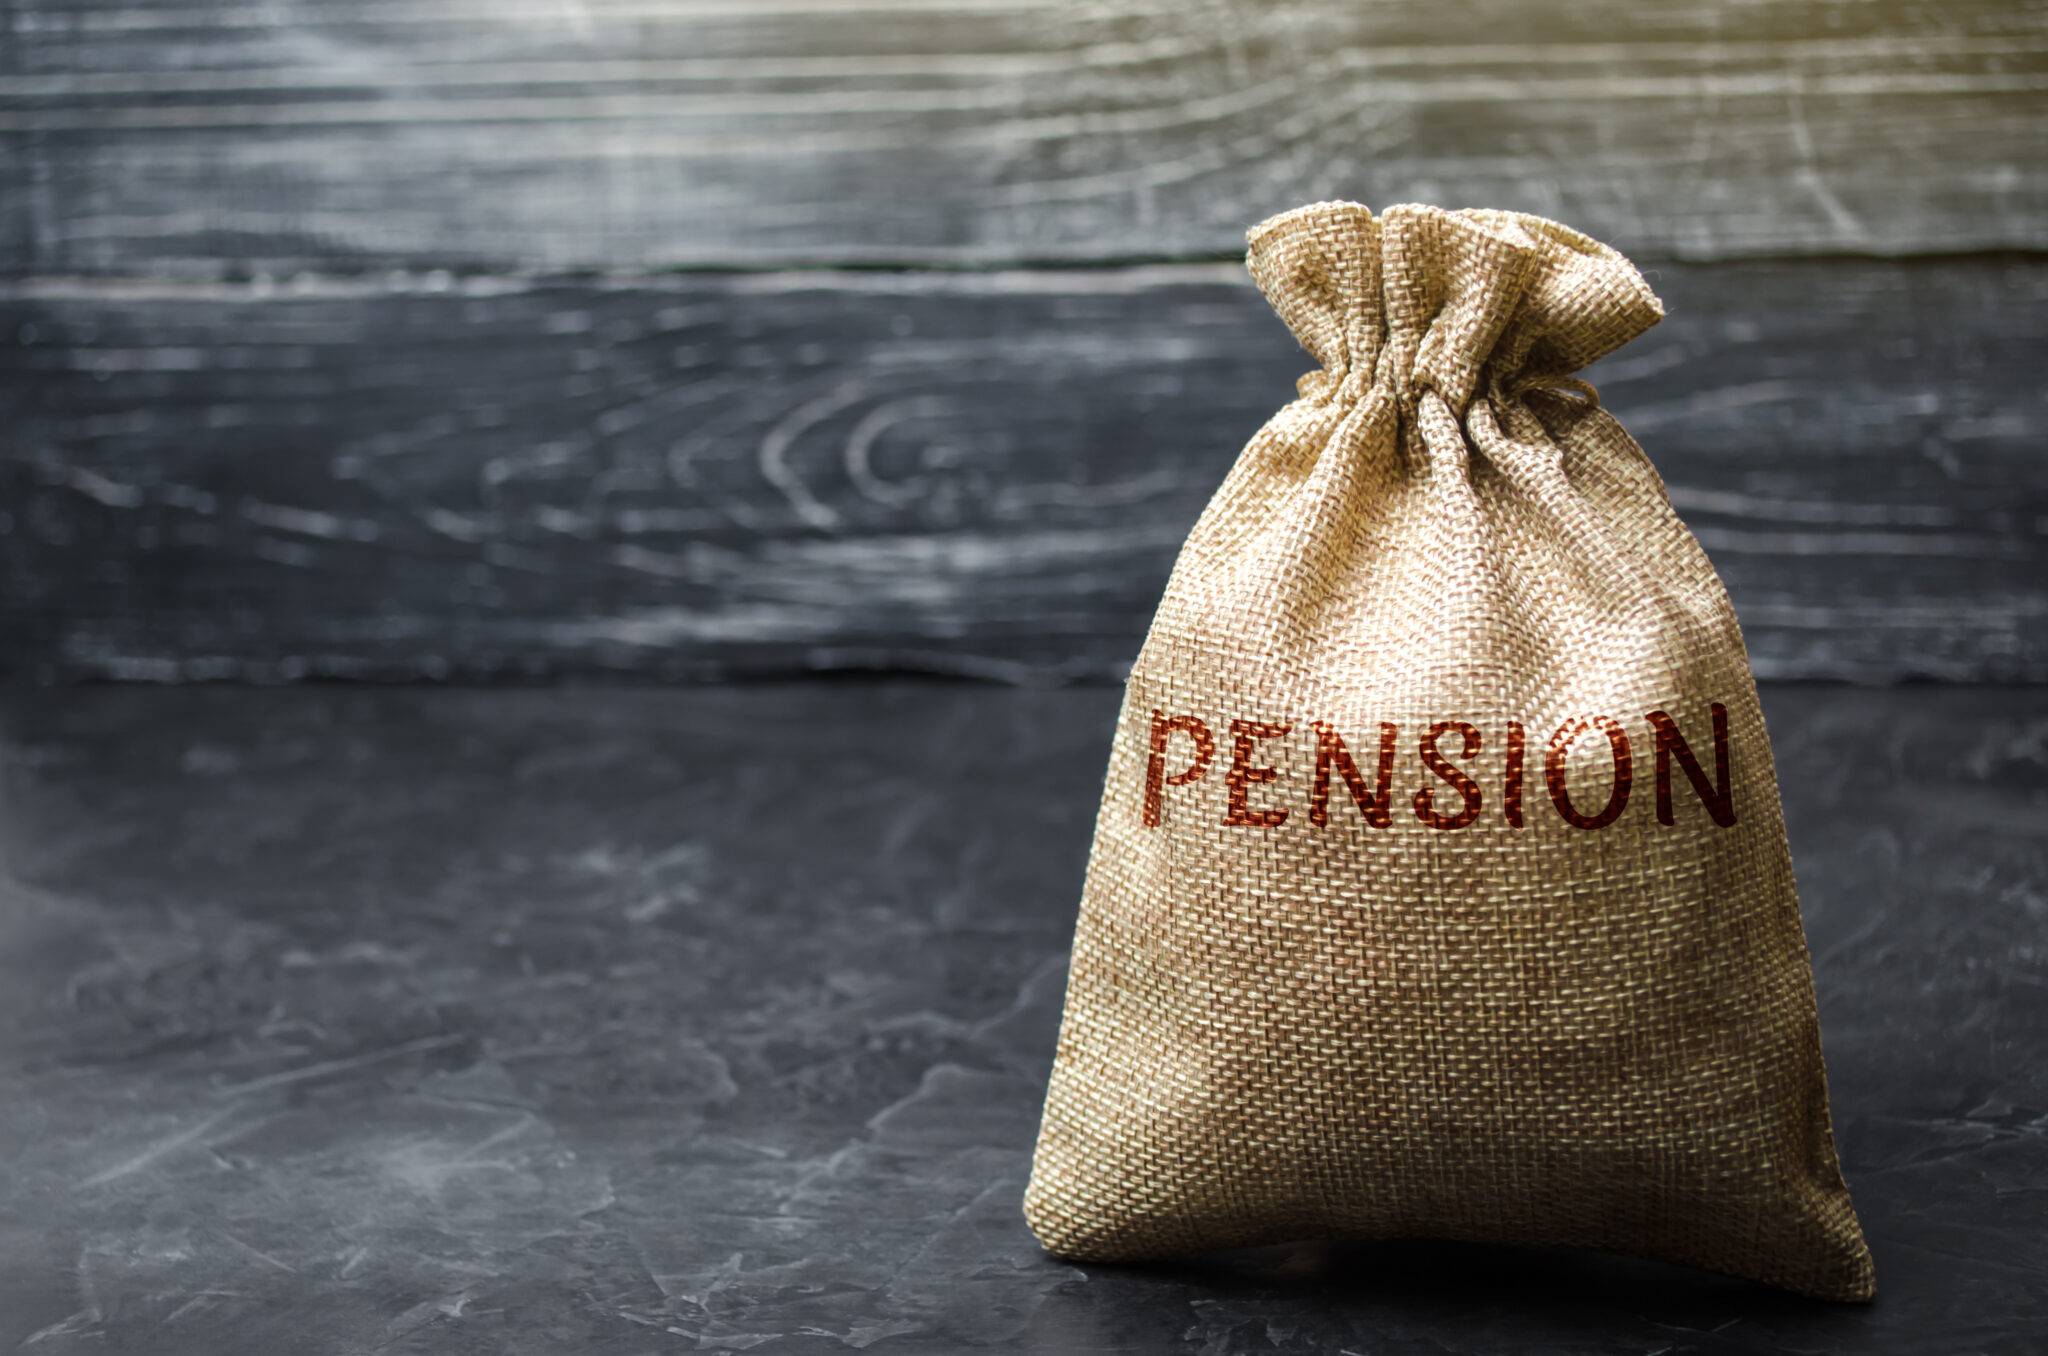 Claiming Tax Relief On Pension Contributions For Previous Years Hmrc